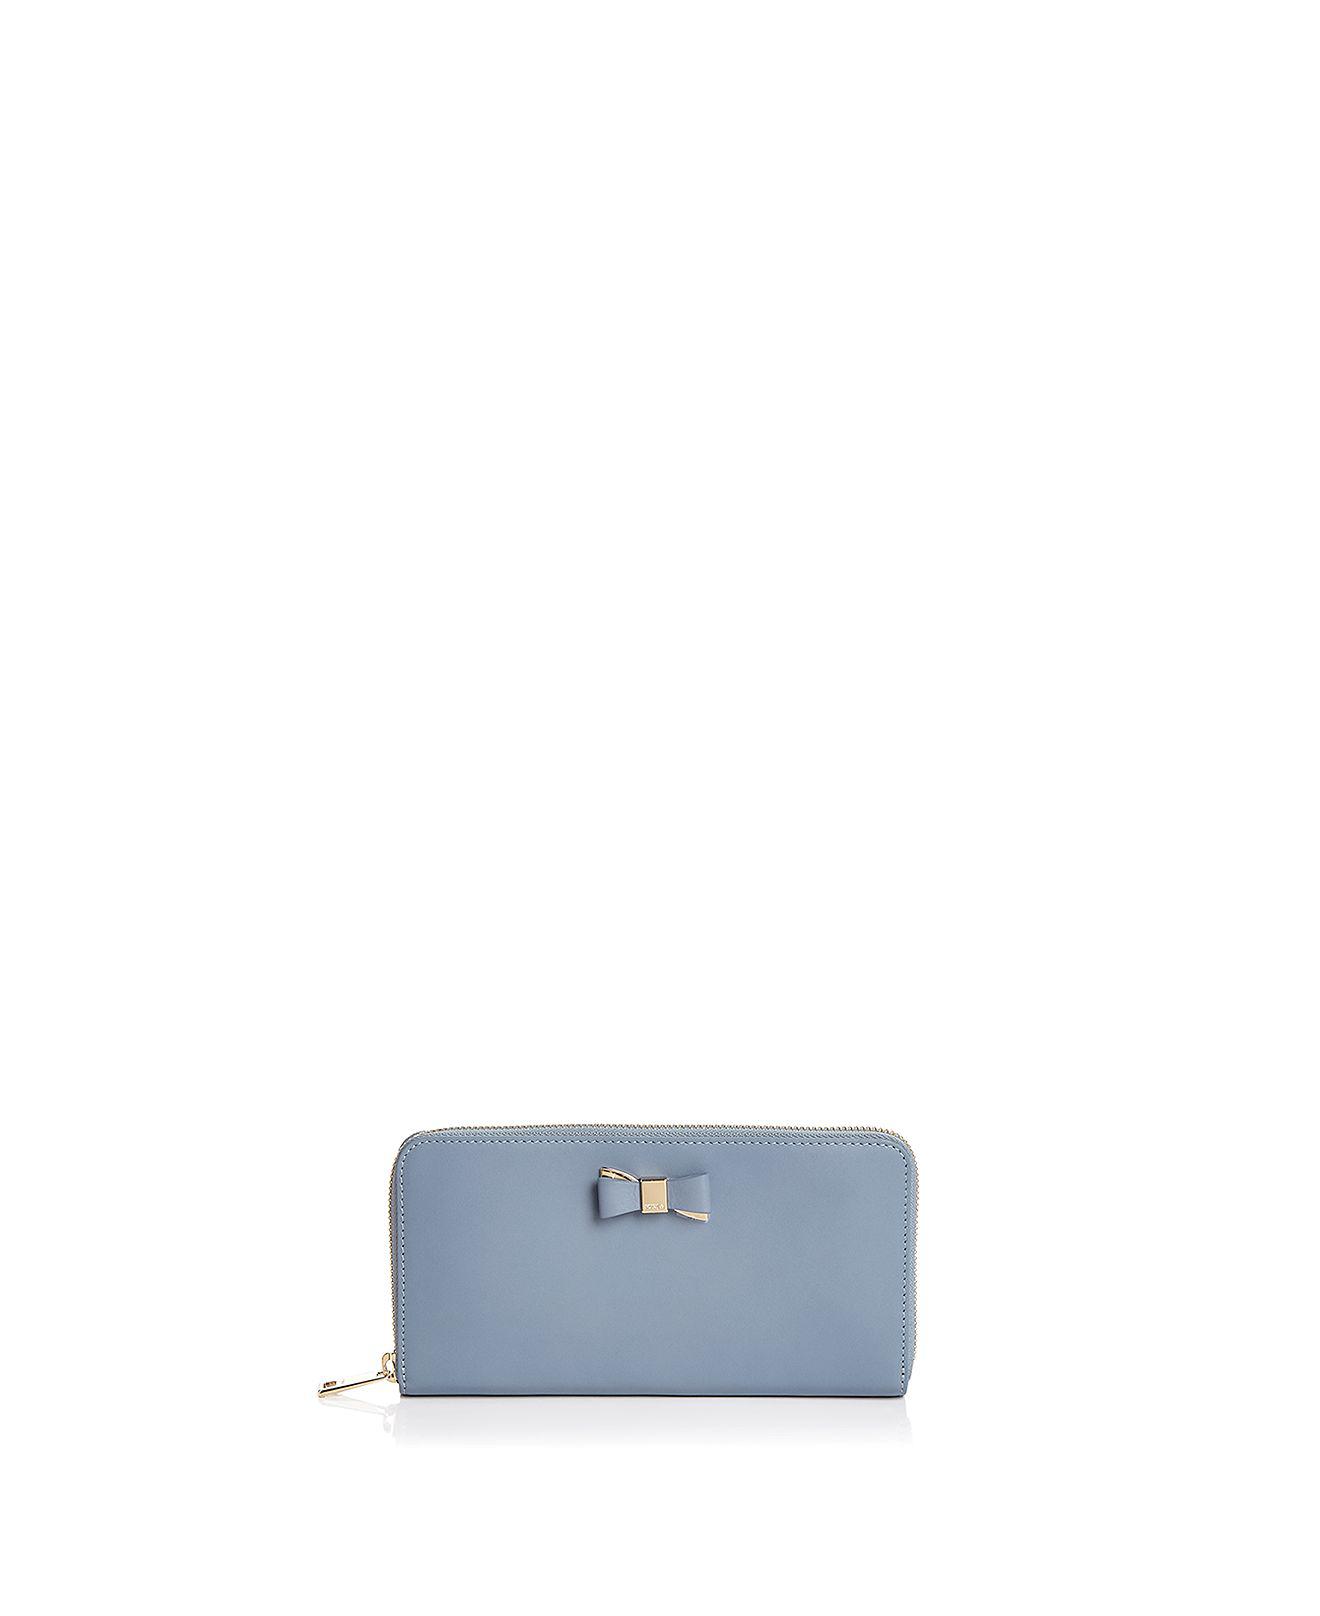 Furla Asia Zip Around Extra Large Leather Wallet in Blue - Lyst